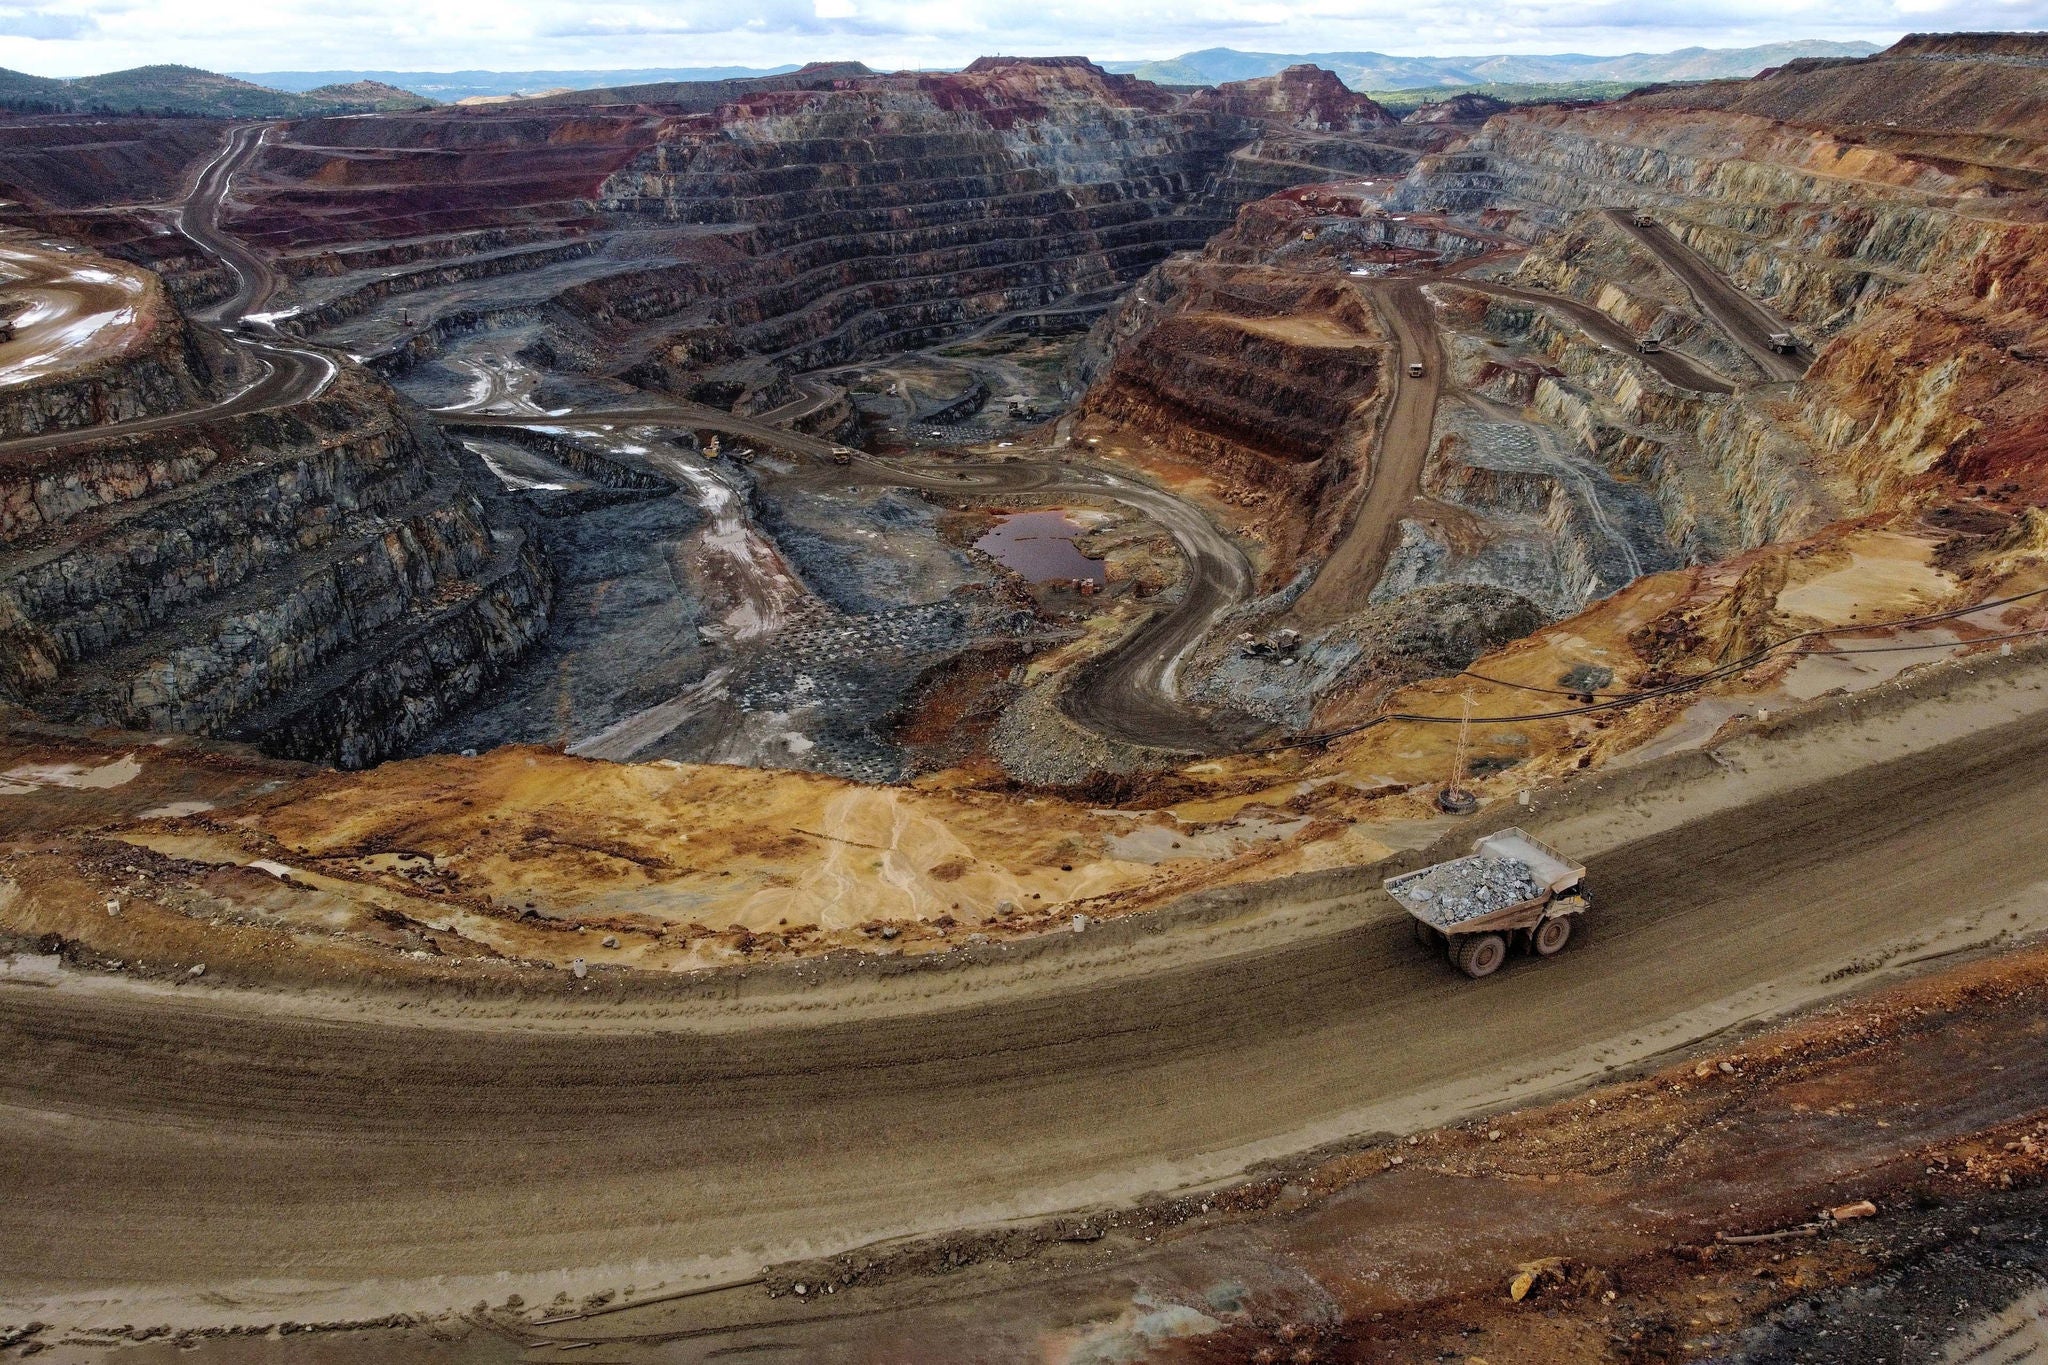 Open pit copper mine in Spain as seen from the viewpoint outside. One loaded dumptruck climbs the hauling road while the pit behind it shows all the red colours from different minerals